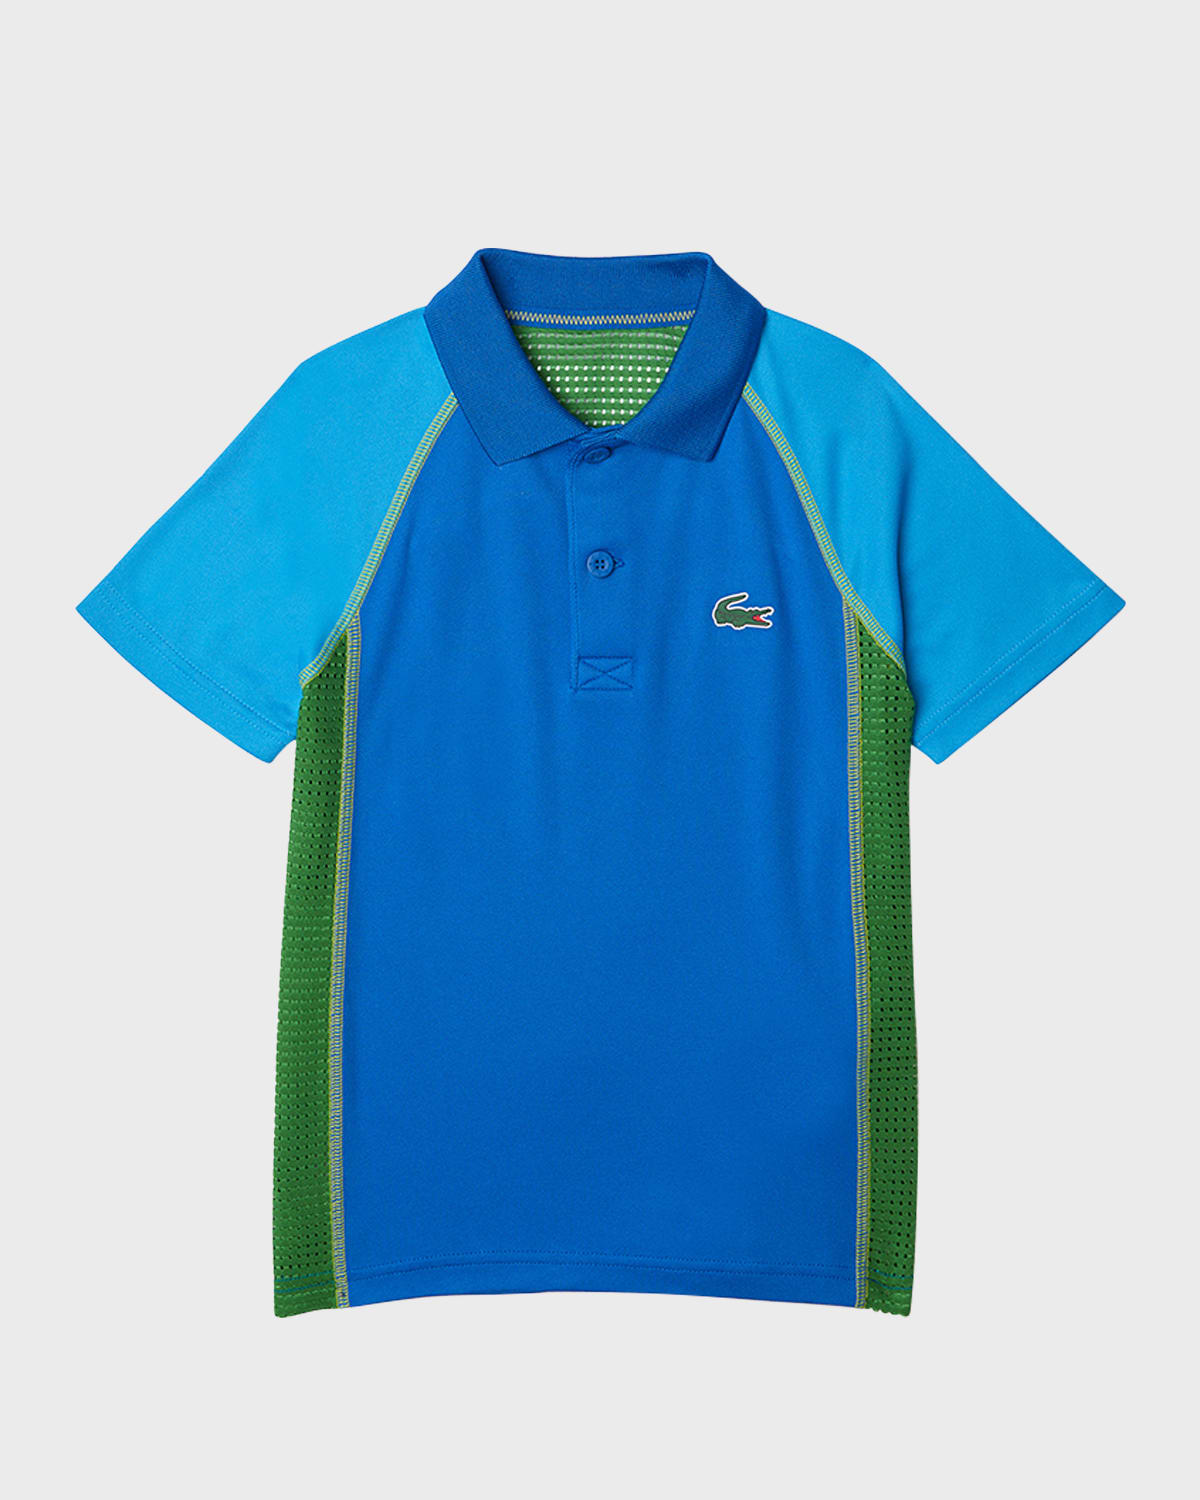 Lacoste Kids' Boy's Color Block Mesh Polo Shirt In Navy